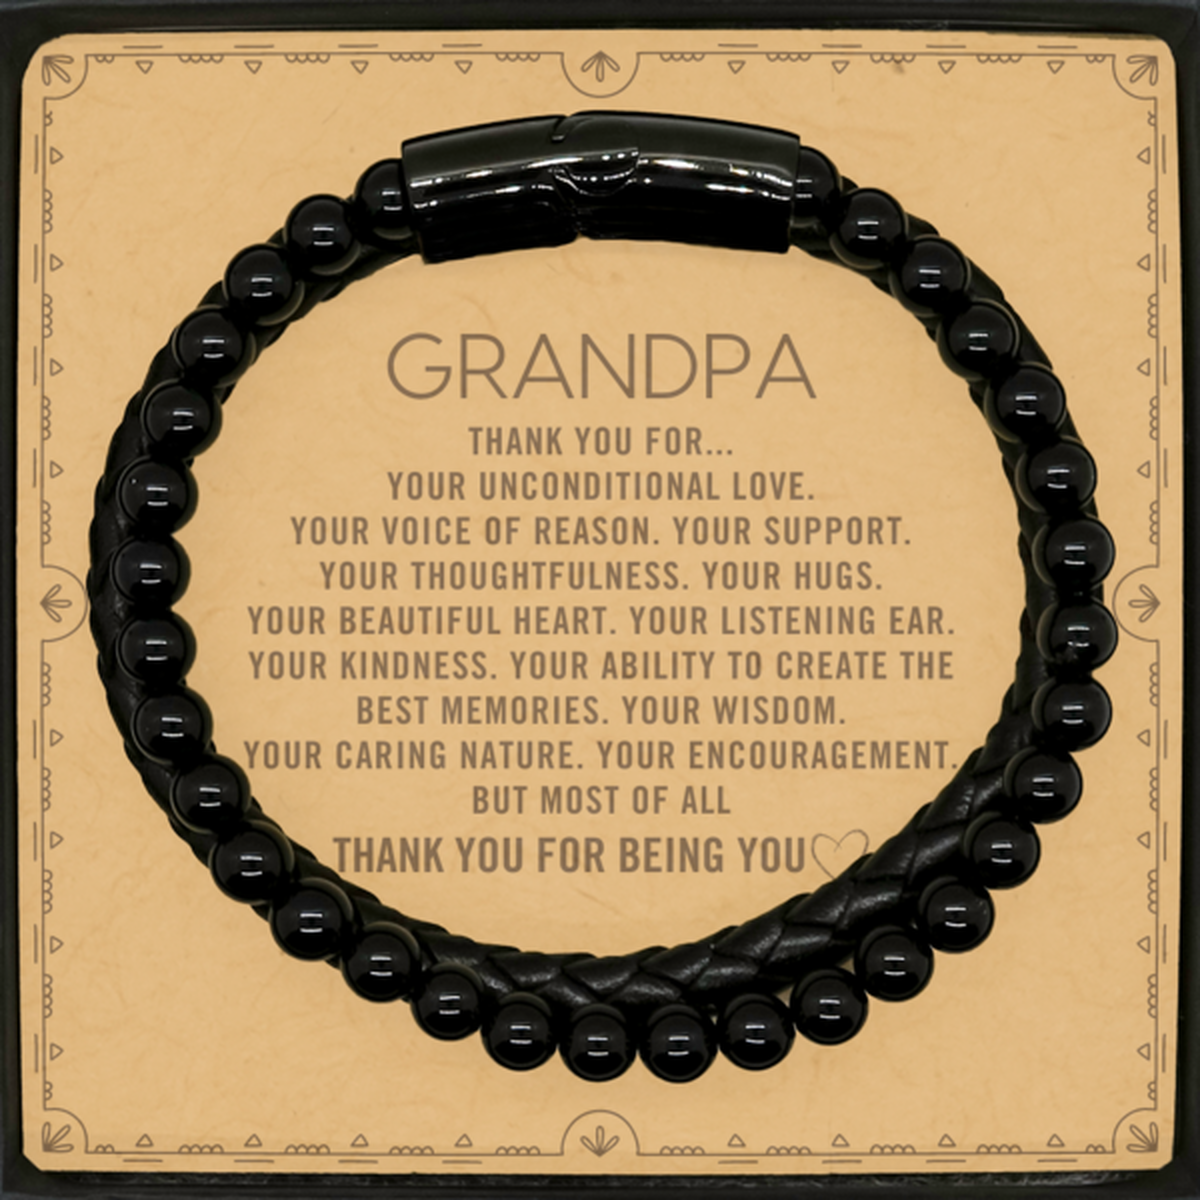 Grandpa Stone Leather Bracelets Custom, Message Card Gifts For Grandpa Christmas Graduation Birthday Gifts for Men Women Grandpa Thank you for Your unconditional love